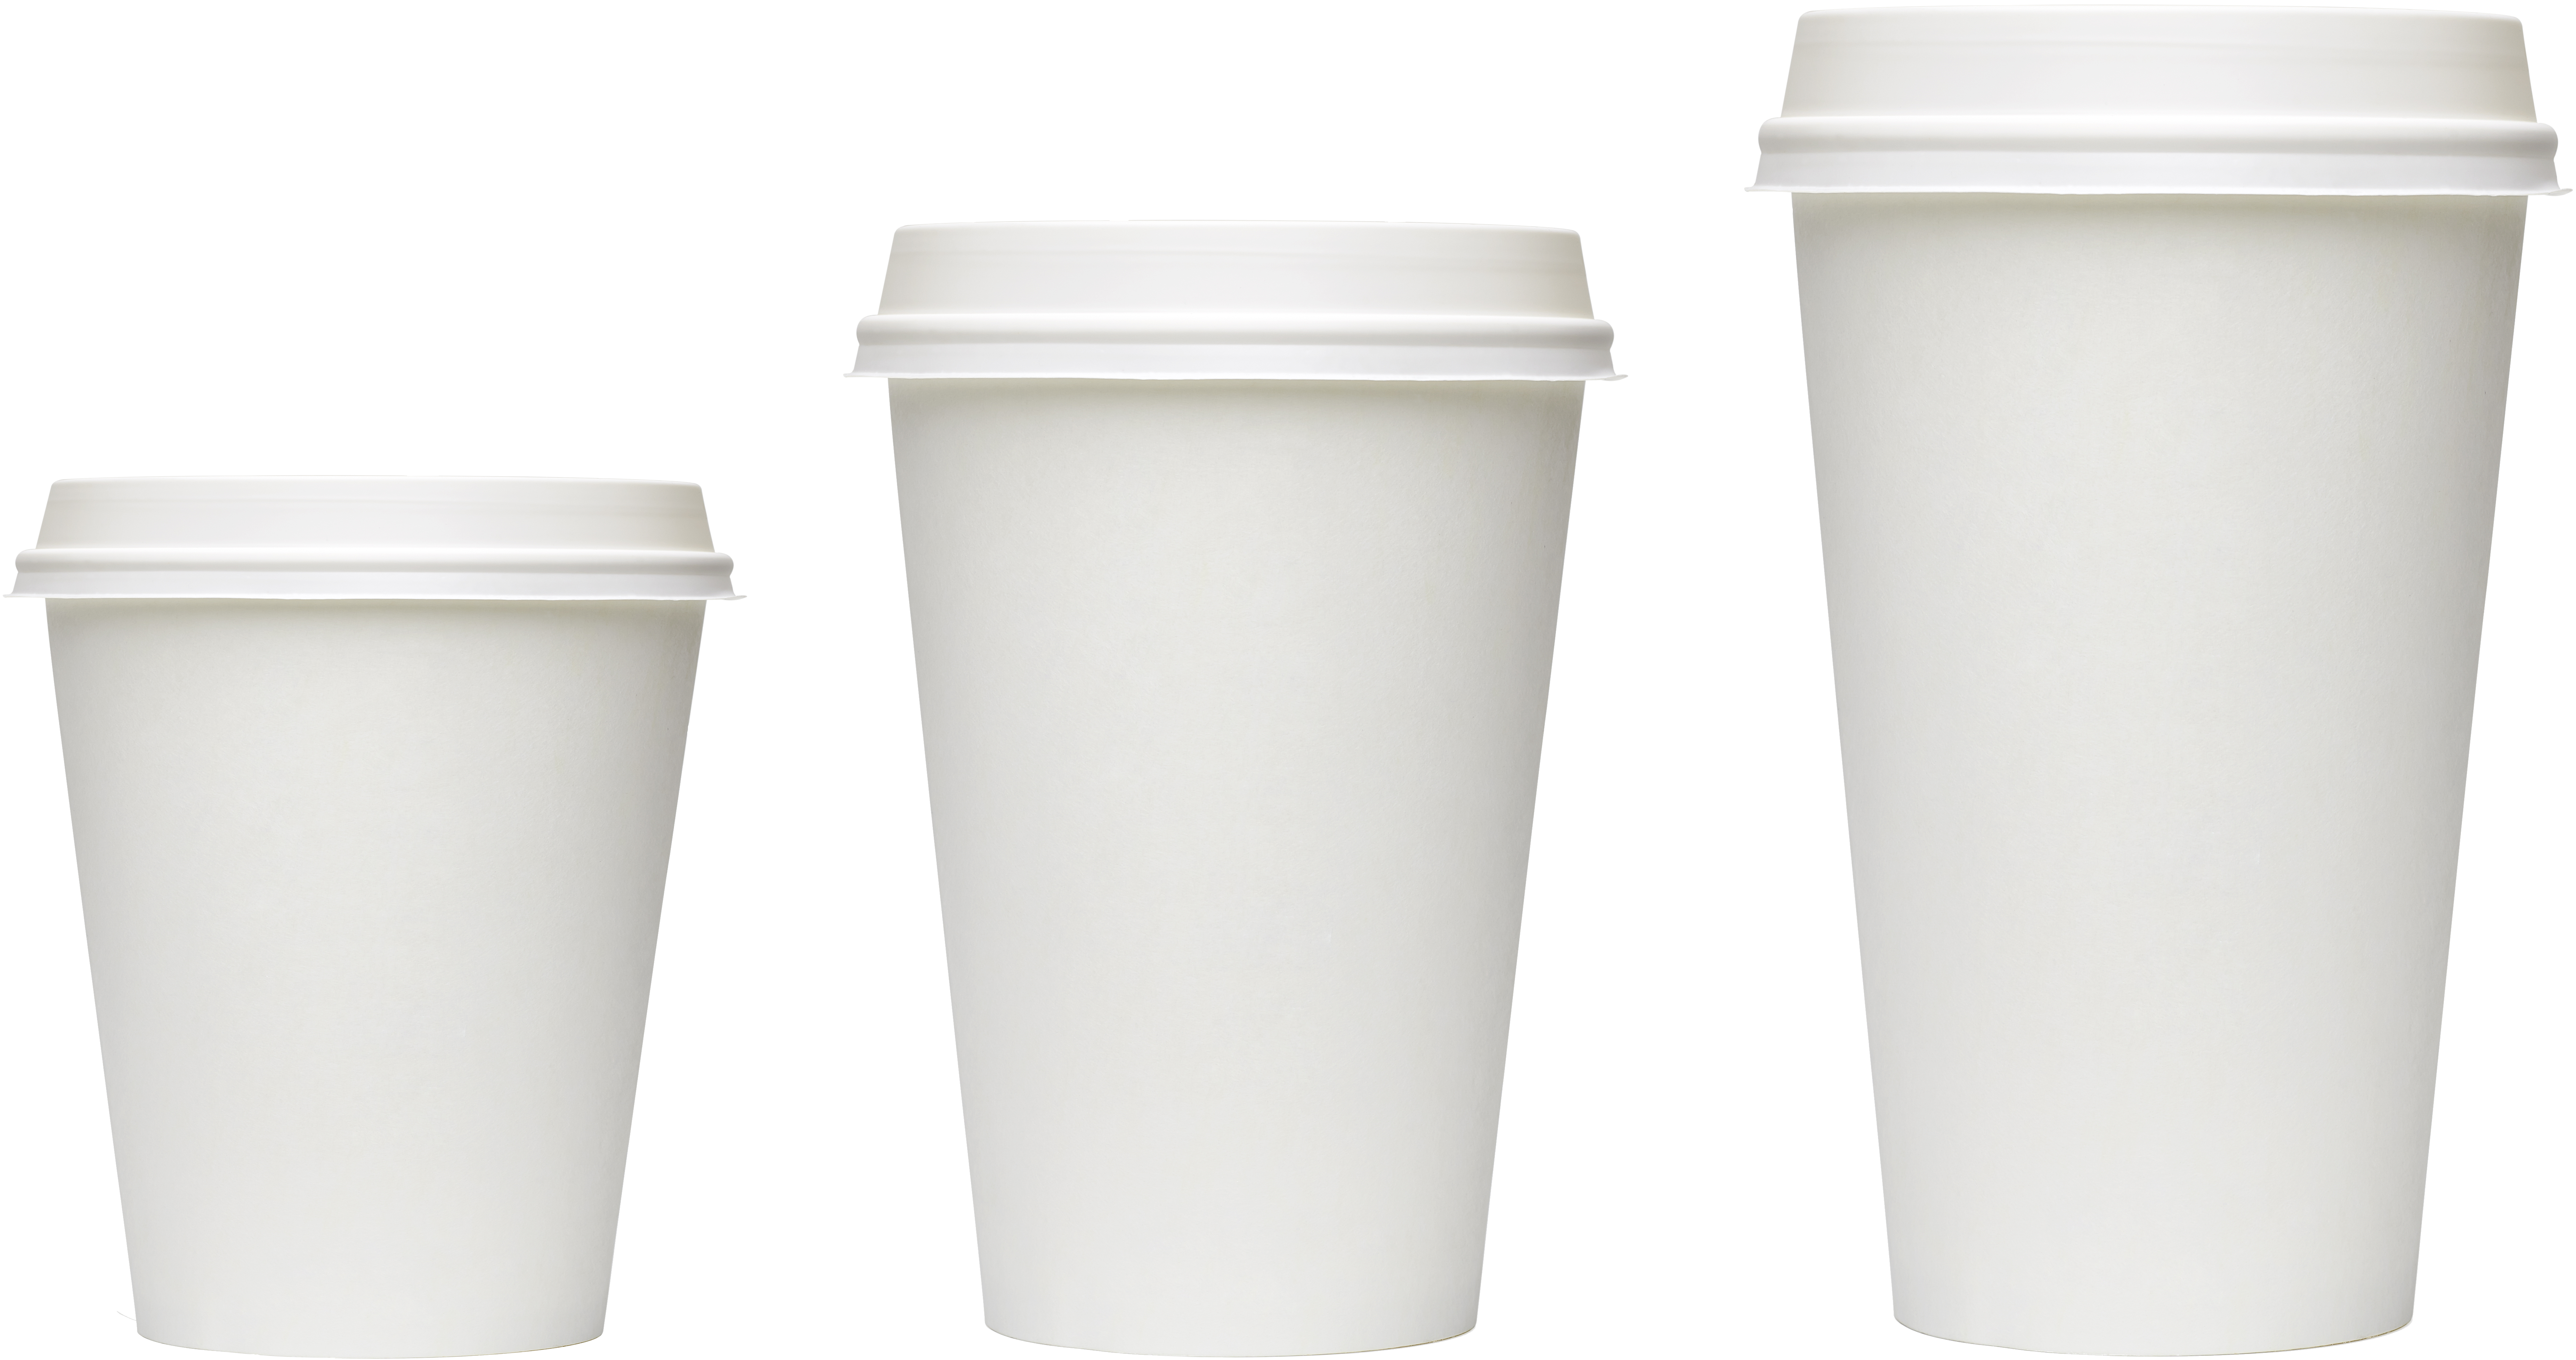 Paper Cups, Eco-Friendly & Sustainable Paper Packaging Solutions for Food Service Industry [ABPP Papers]